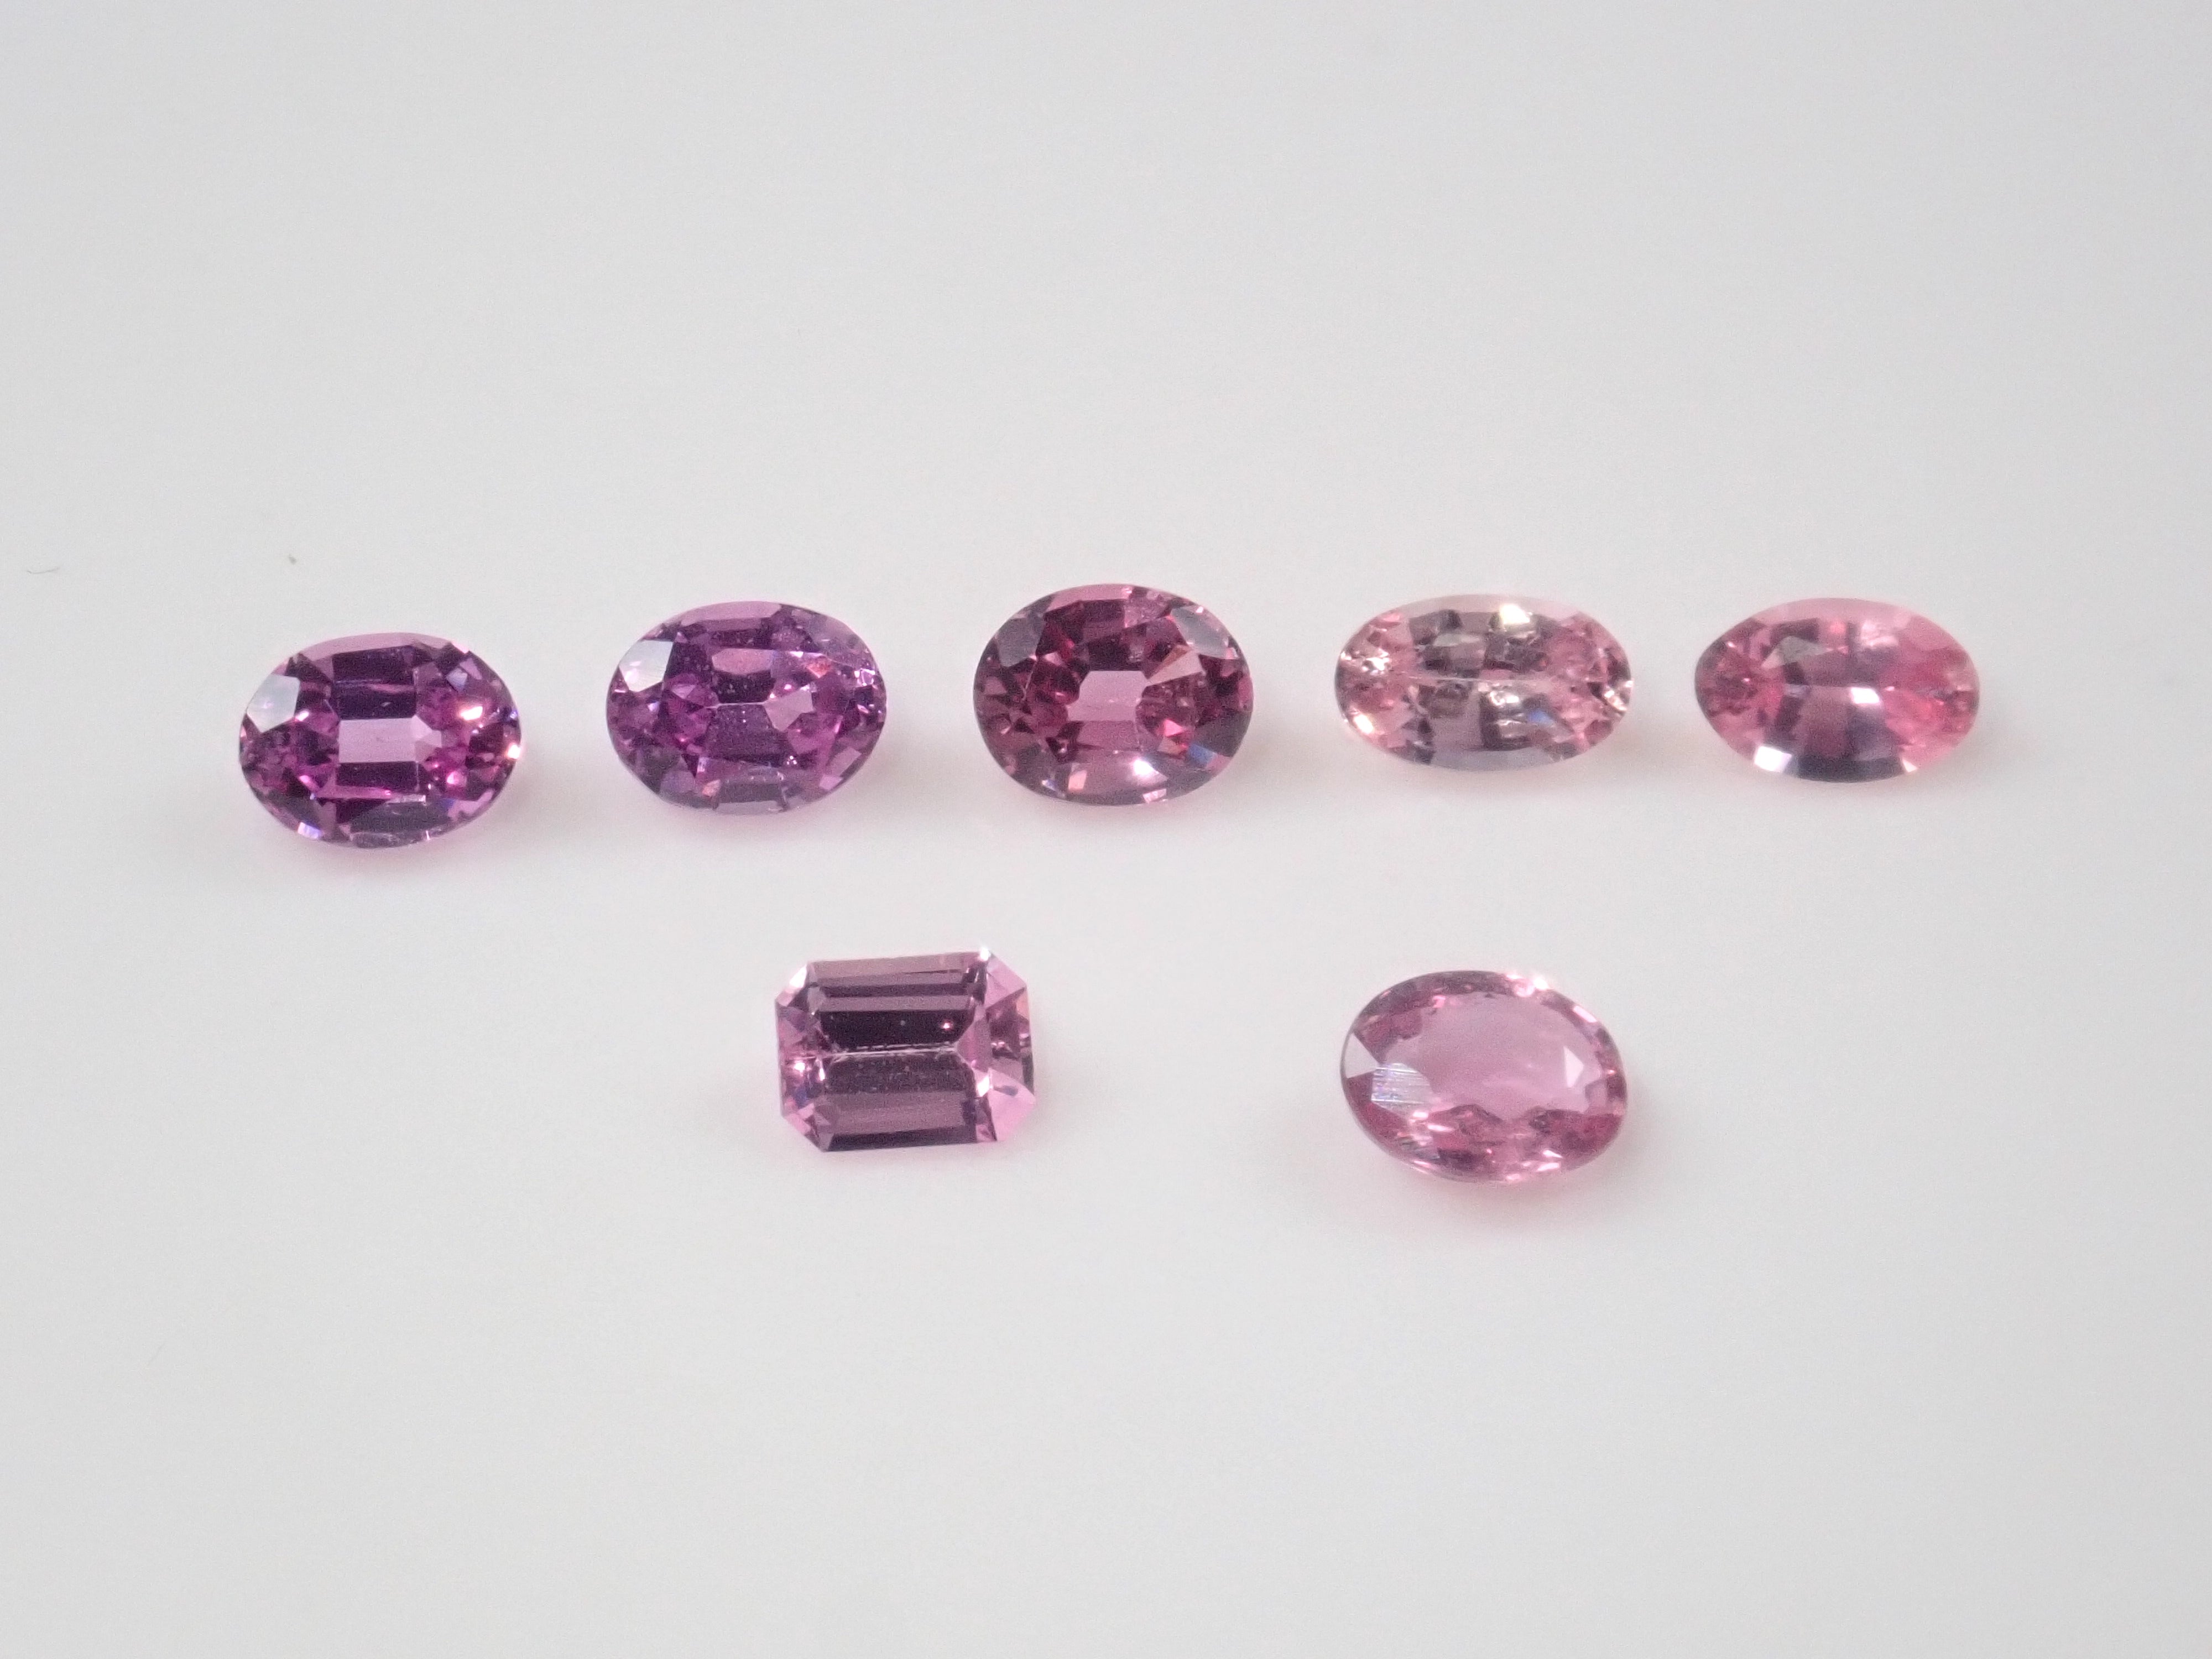 [On sale from 10pm on 8/4] Limited to 7 stones Pink sapphire gacha (Only 1 stone is 0.322ct Padparadscha sapphire with DGL certificate) 1 loose stone [Multiple purchase discounts available]